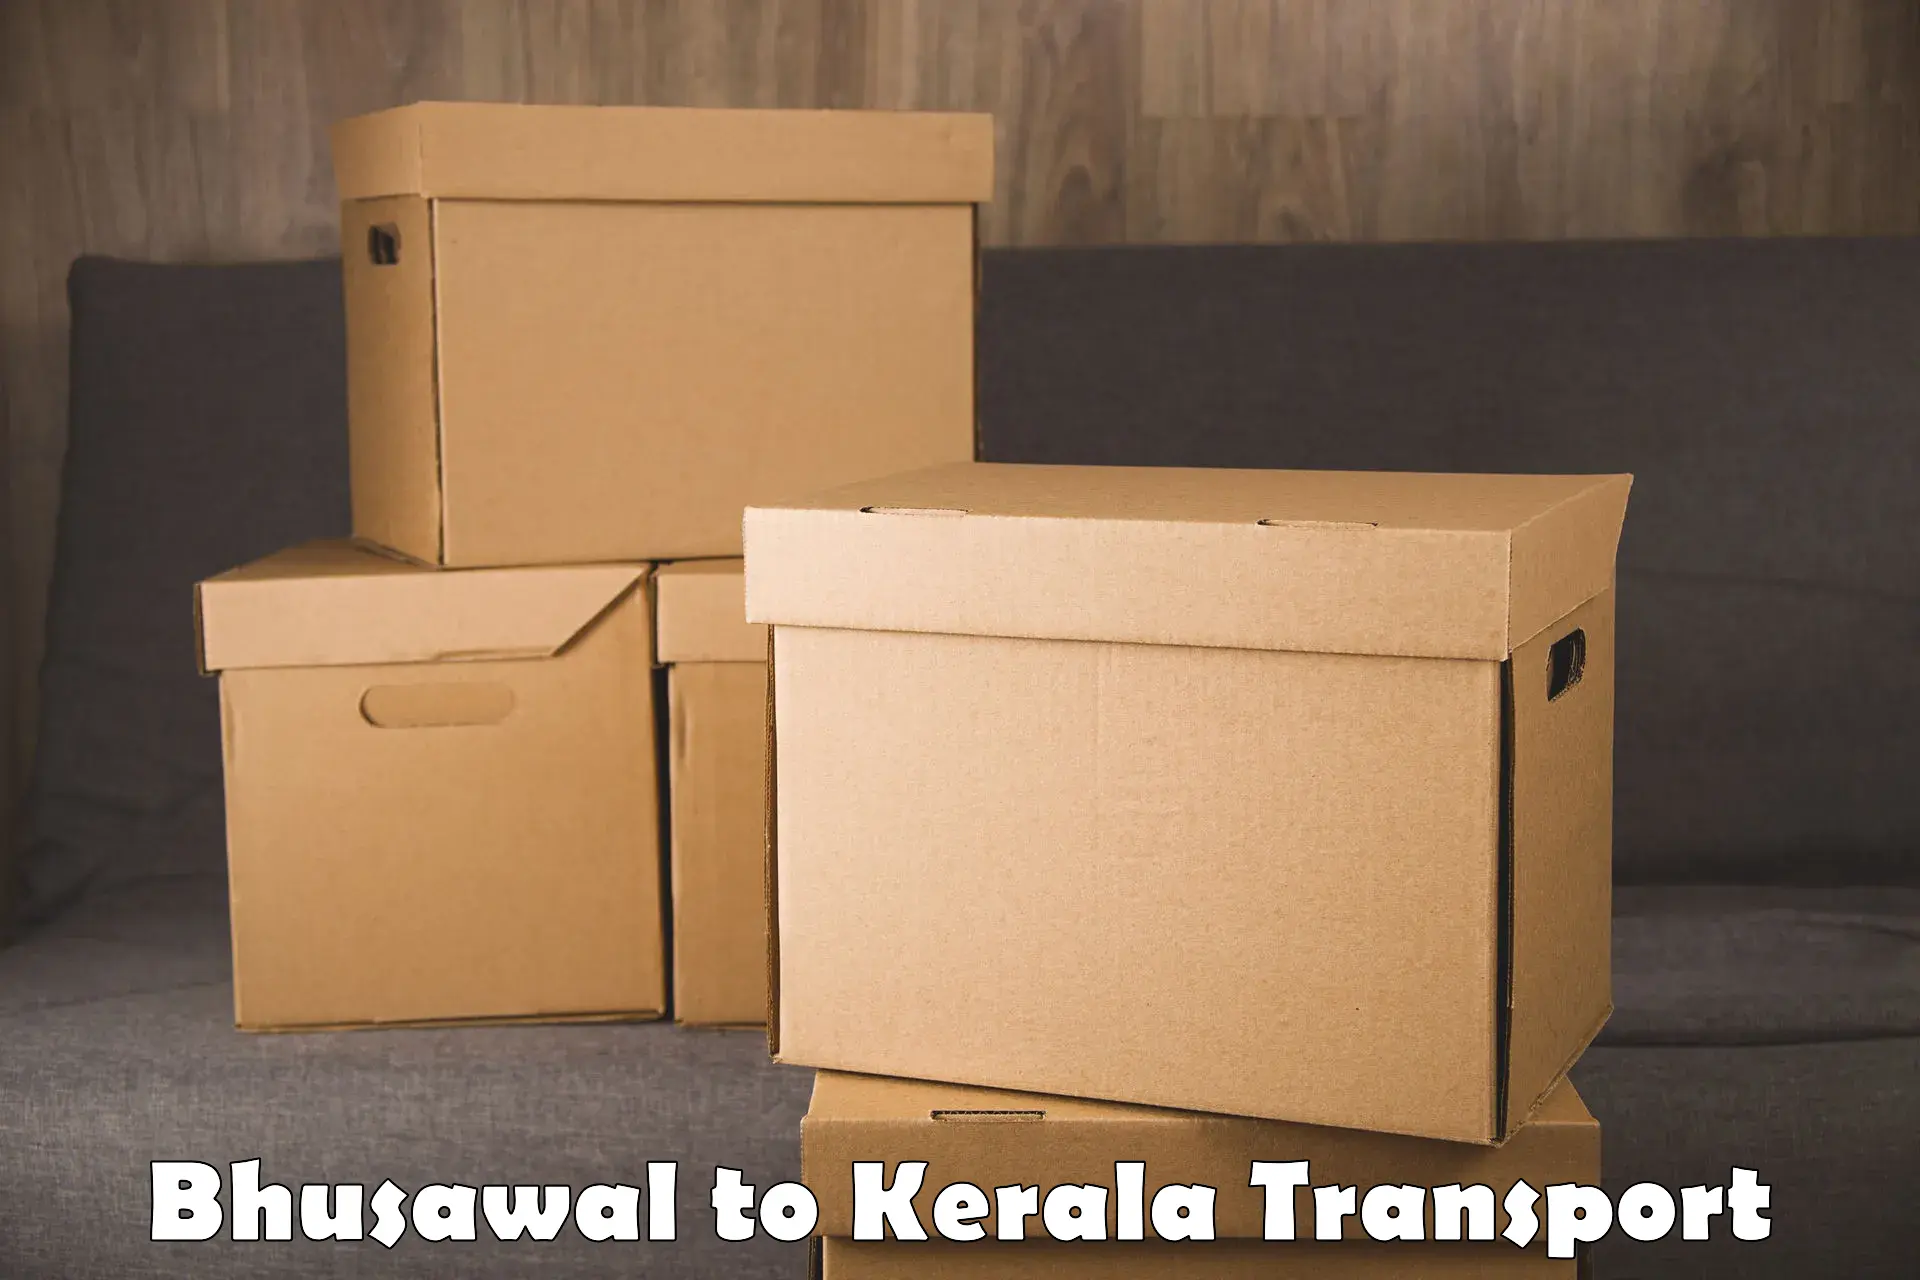 Delivery service Bhusawal to Pandikkad